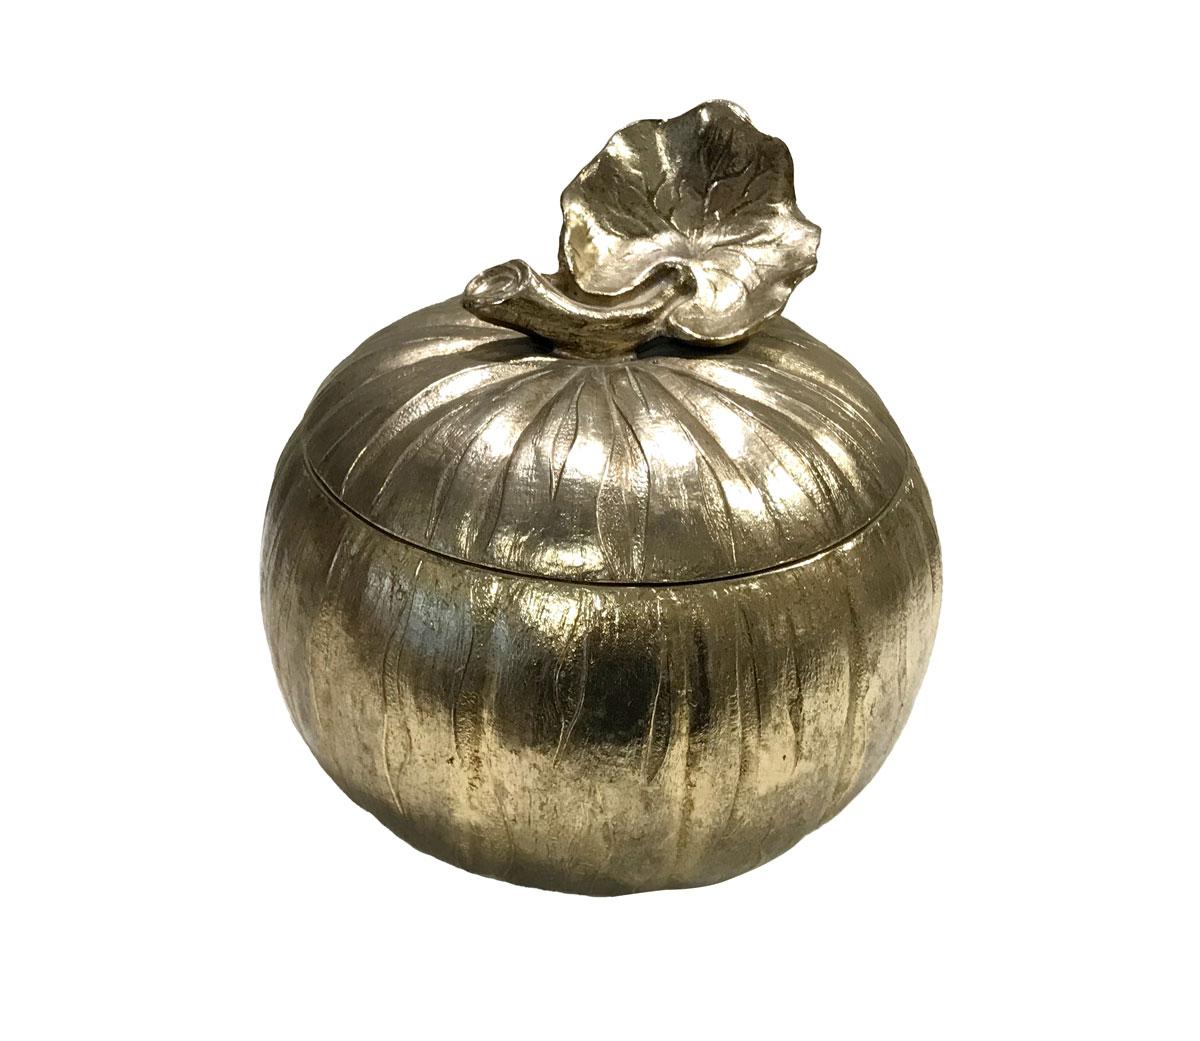 Pumpkin ice bucket designed by Mauro Manetti, circa 1970 . Outside is made of silver-plated cast aluminum with a golden patina and a white enameled metallic inner part. 

Not marked beneath the base but well-known model of ice bucket made by the